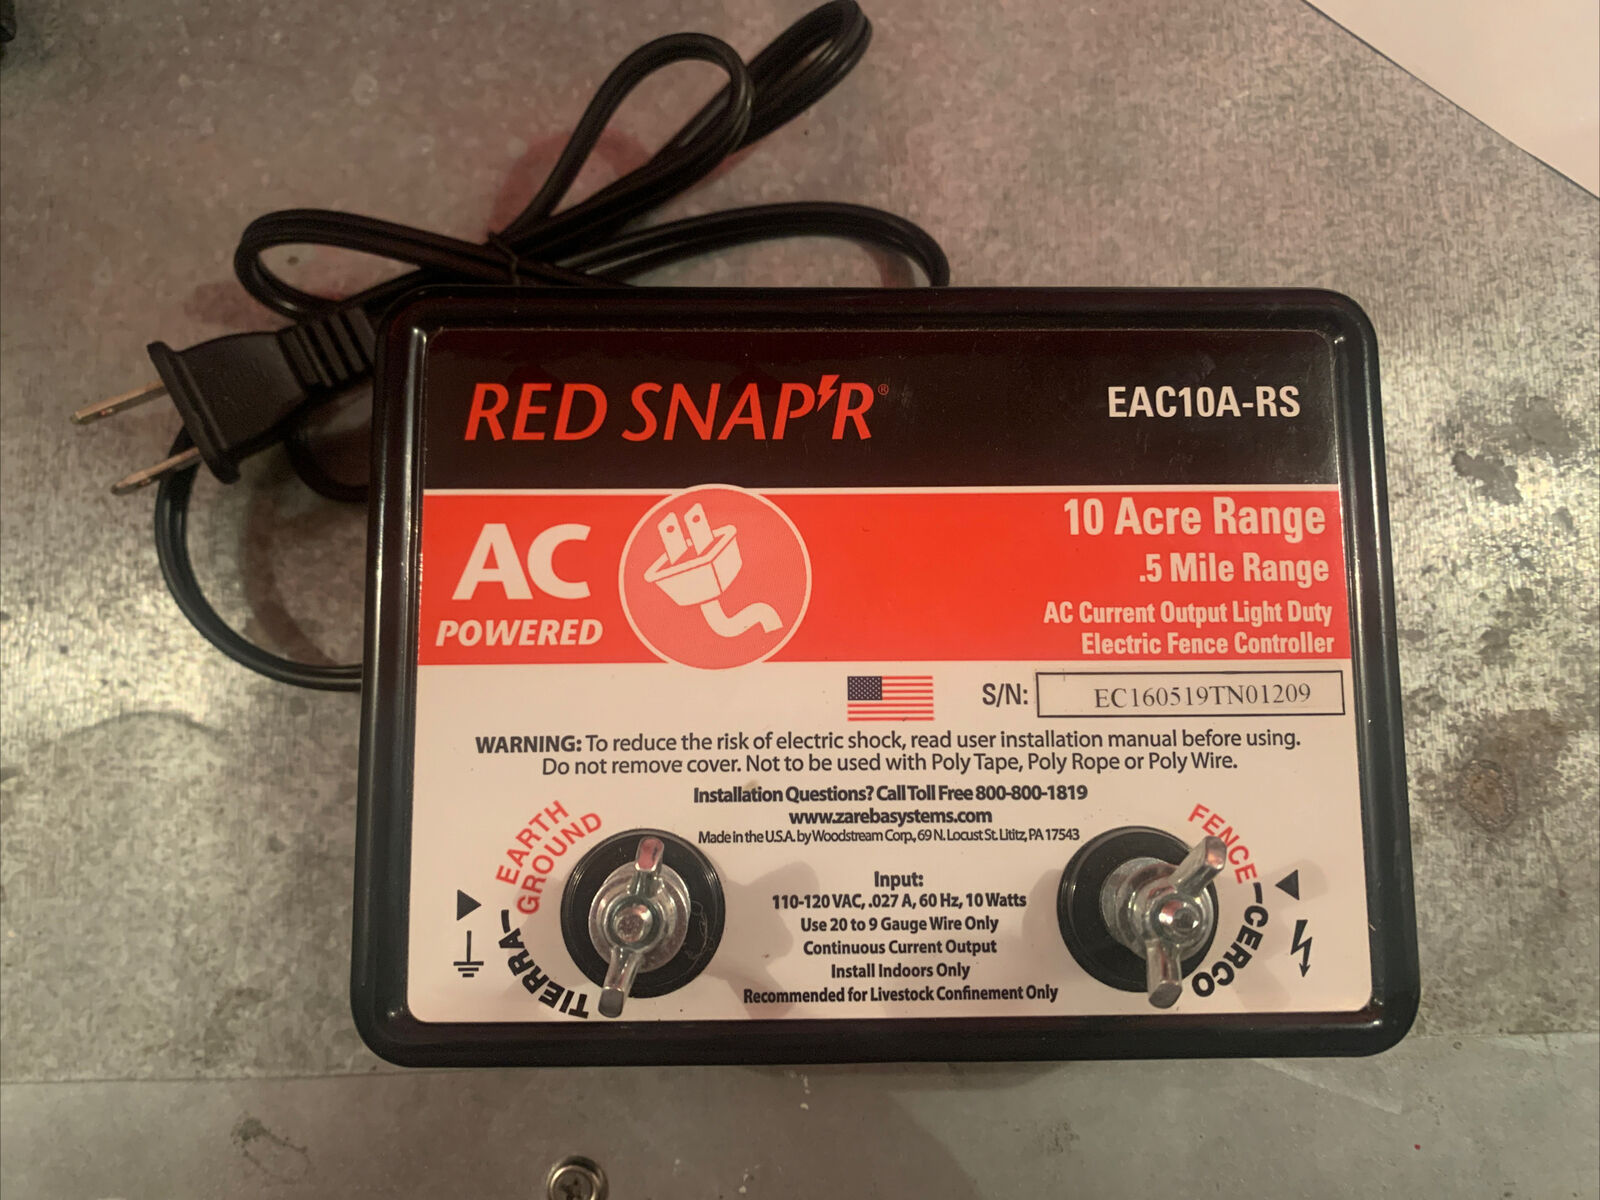 Red Snap'r Eac10a-rs 10 Acre Range Electric Fence Charger Energizer Made In Usa